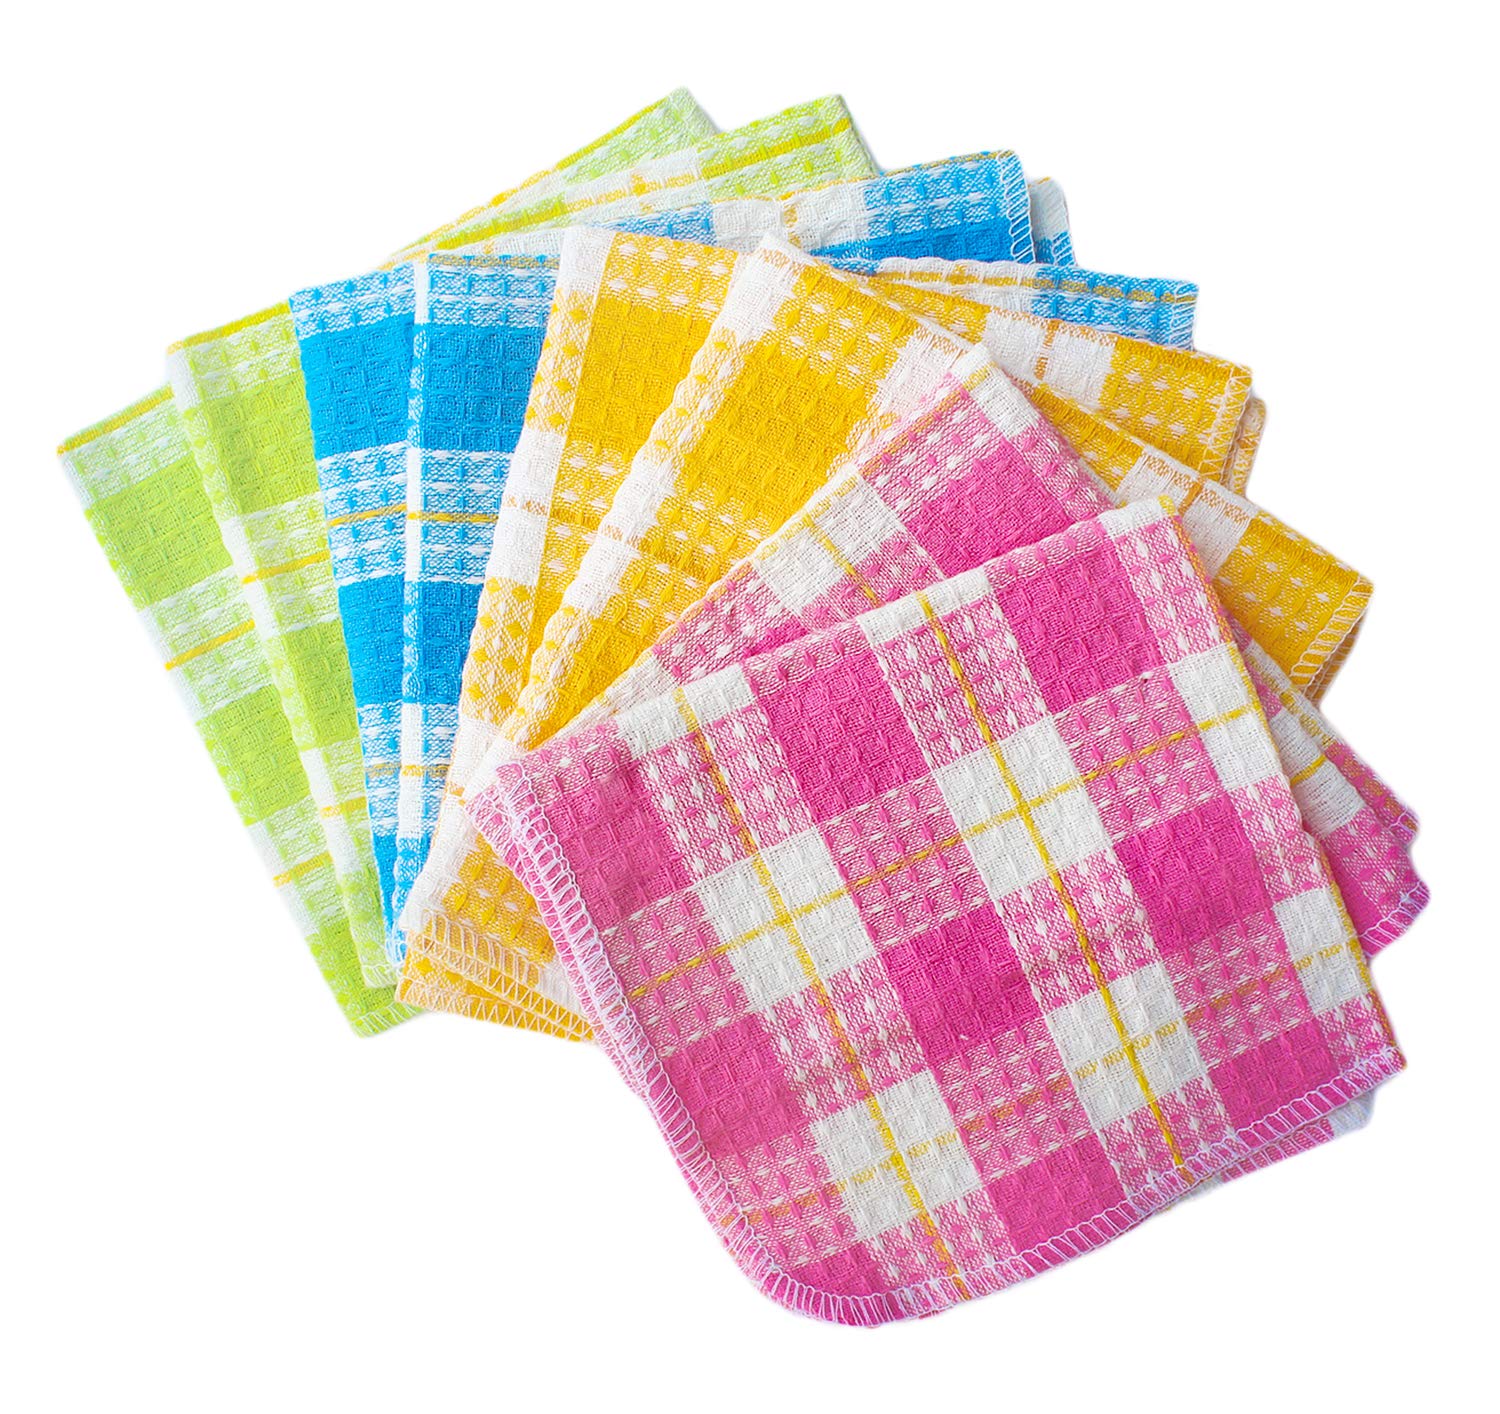 Book Cover Honla Dish Cloths for Washing Dishes,Cotton Dish Rags,Set of 8 Kitchen Washcloths in 4 Assorted Color,13 by 13 Inch